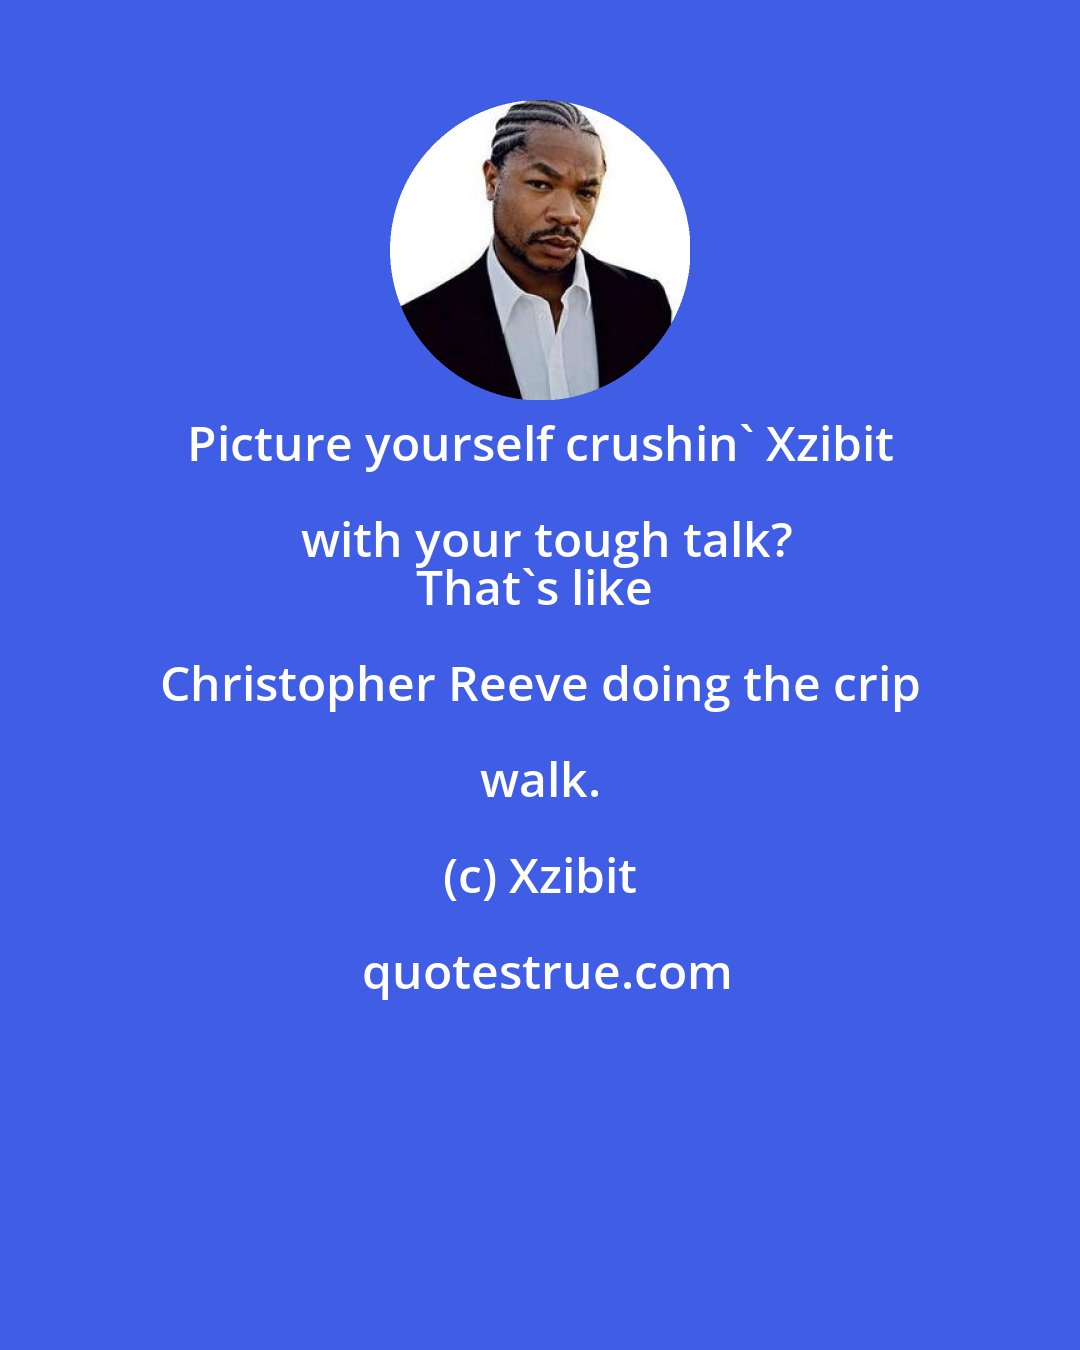 Xzibit: Picture yourself crushin' Xzibit with your tough talk?
That's like Christopher Reeve doing the crip walk.